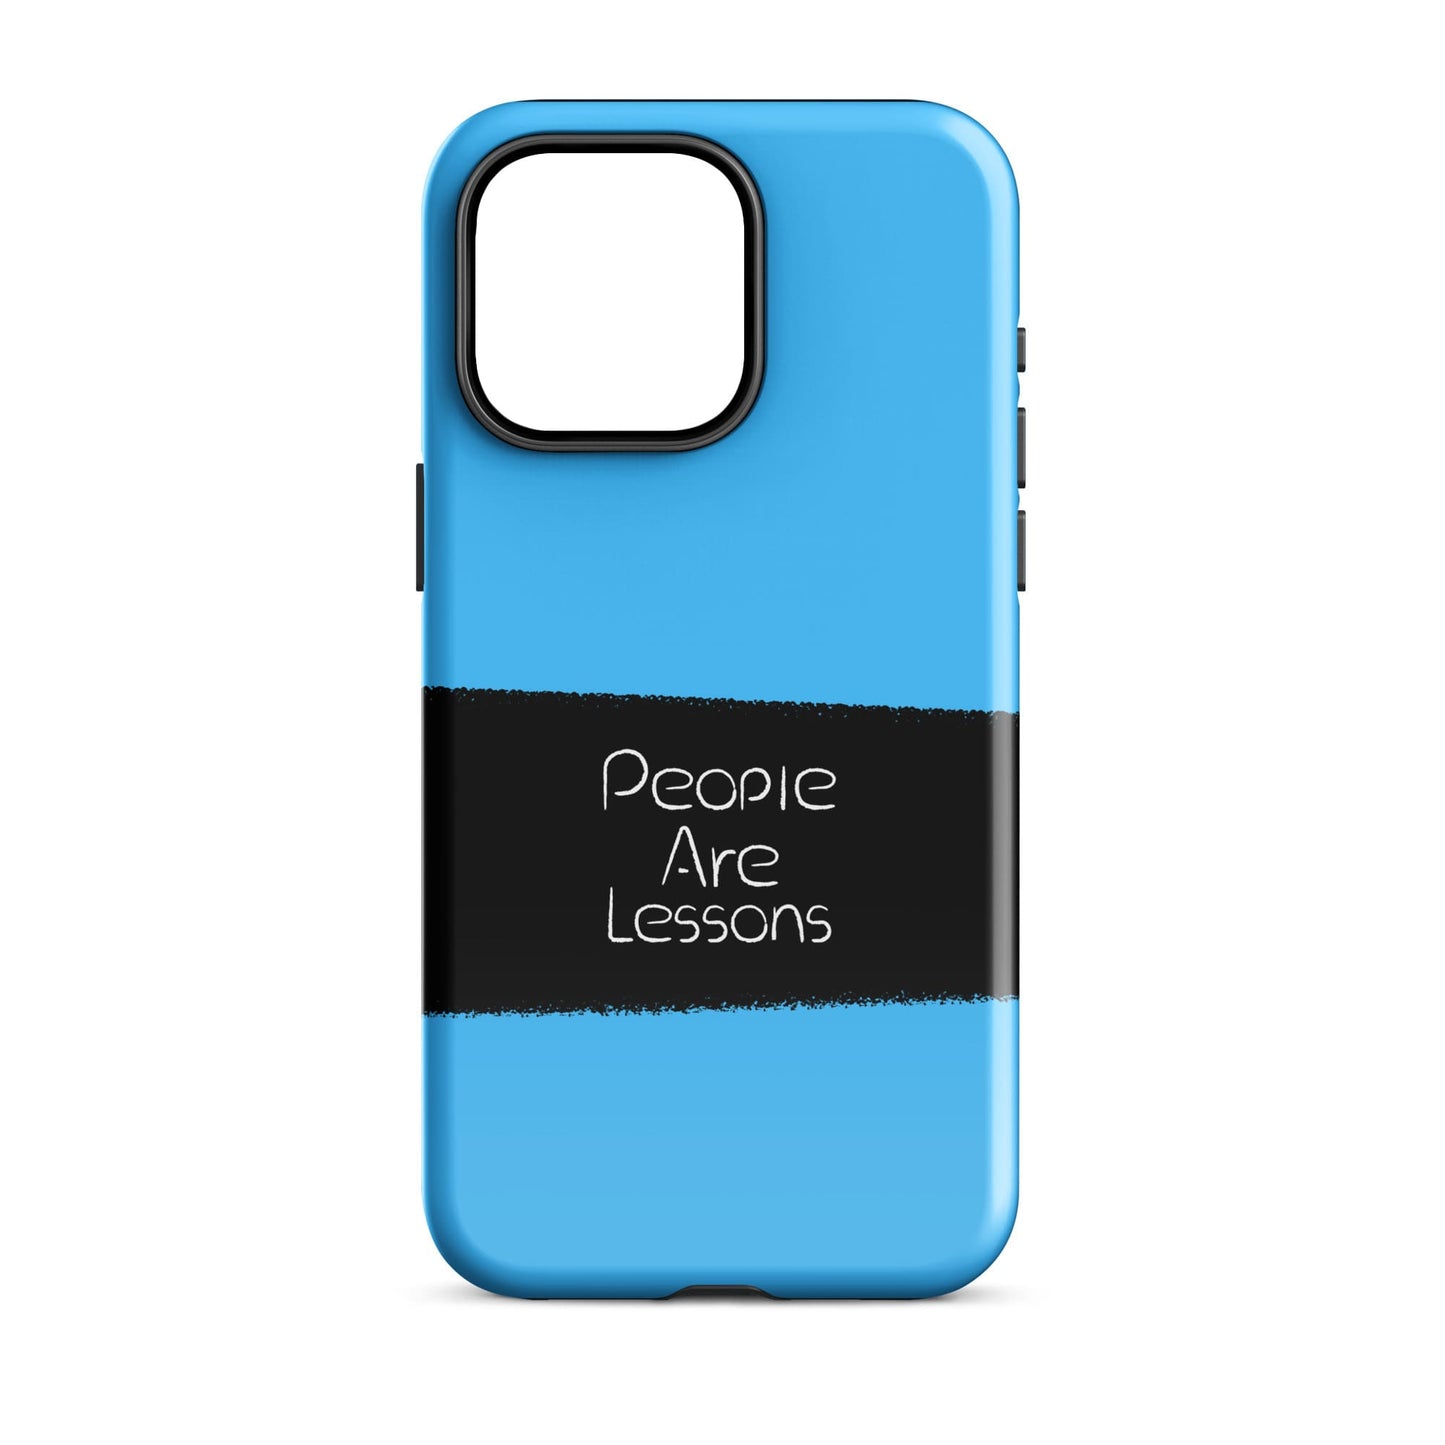 People Are Lessons - (Blue) Quoted iPhone Case